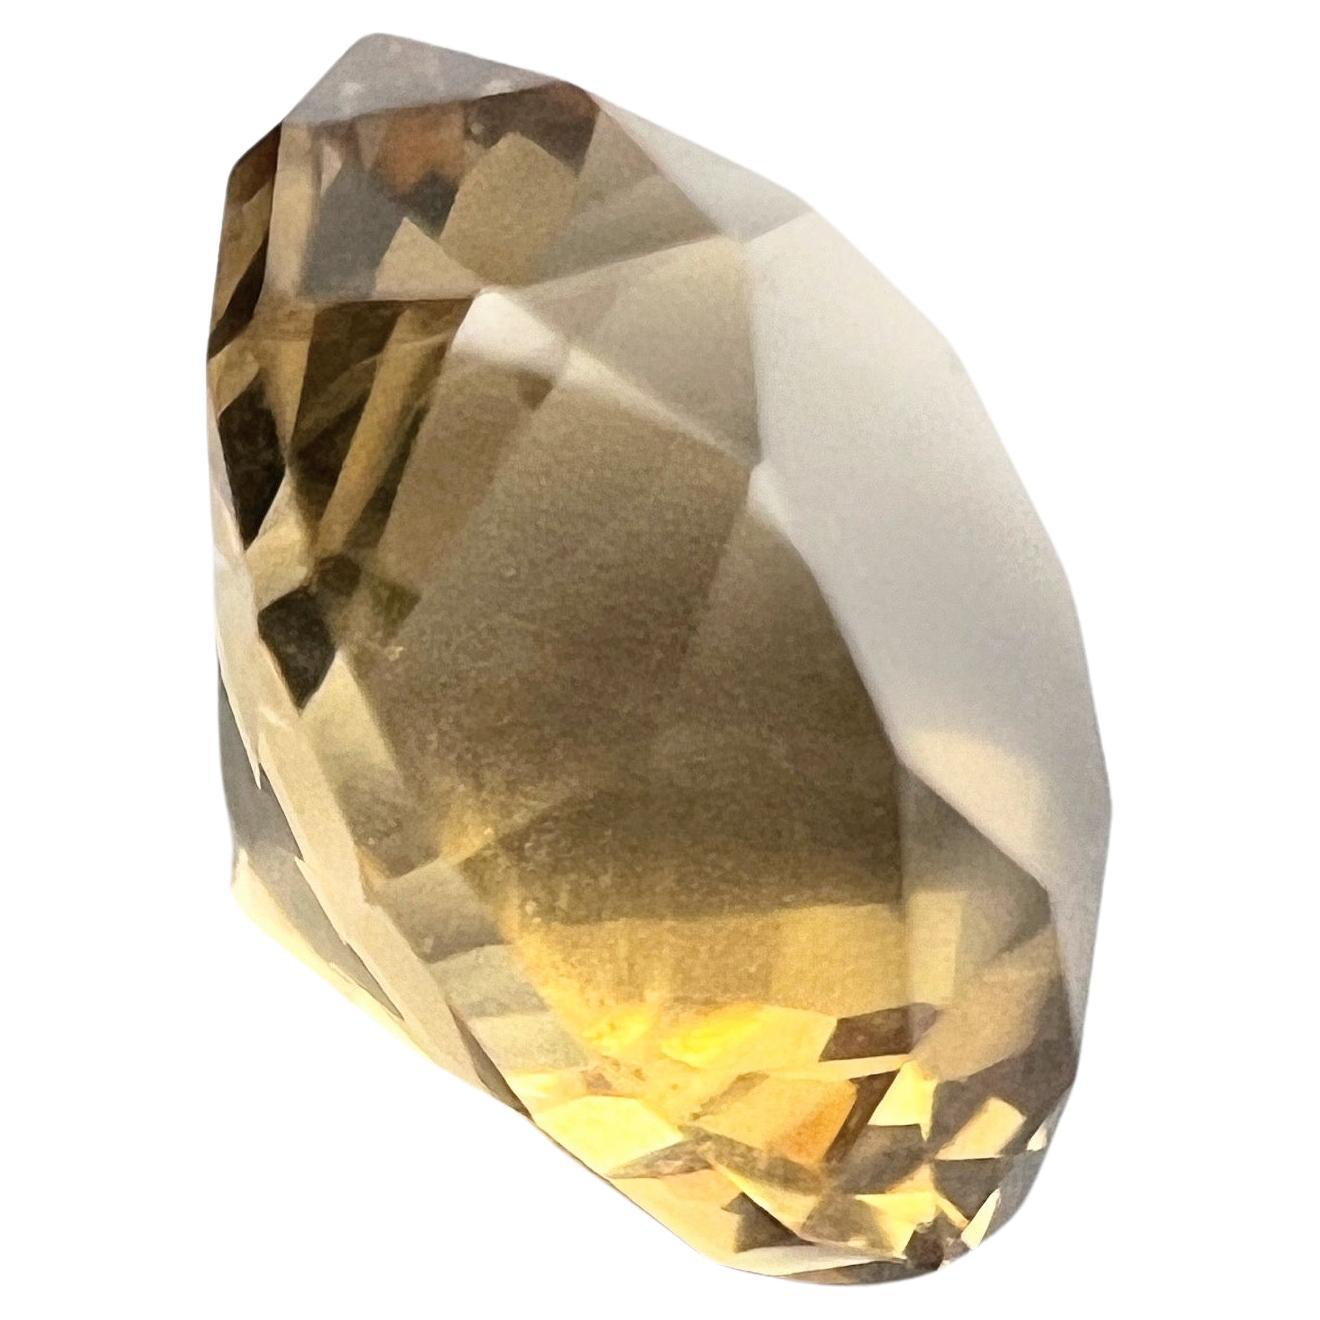 Embrace the captivating allure of our 3.85ct Brilliant Cut Natural UNHEATED Citrine Gemstone. With its precise dimensions of 10.2mm in length and 8.2mm in width, this gemstone is a paragon of elegance and charm. The oval cut accentuates the